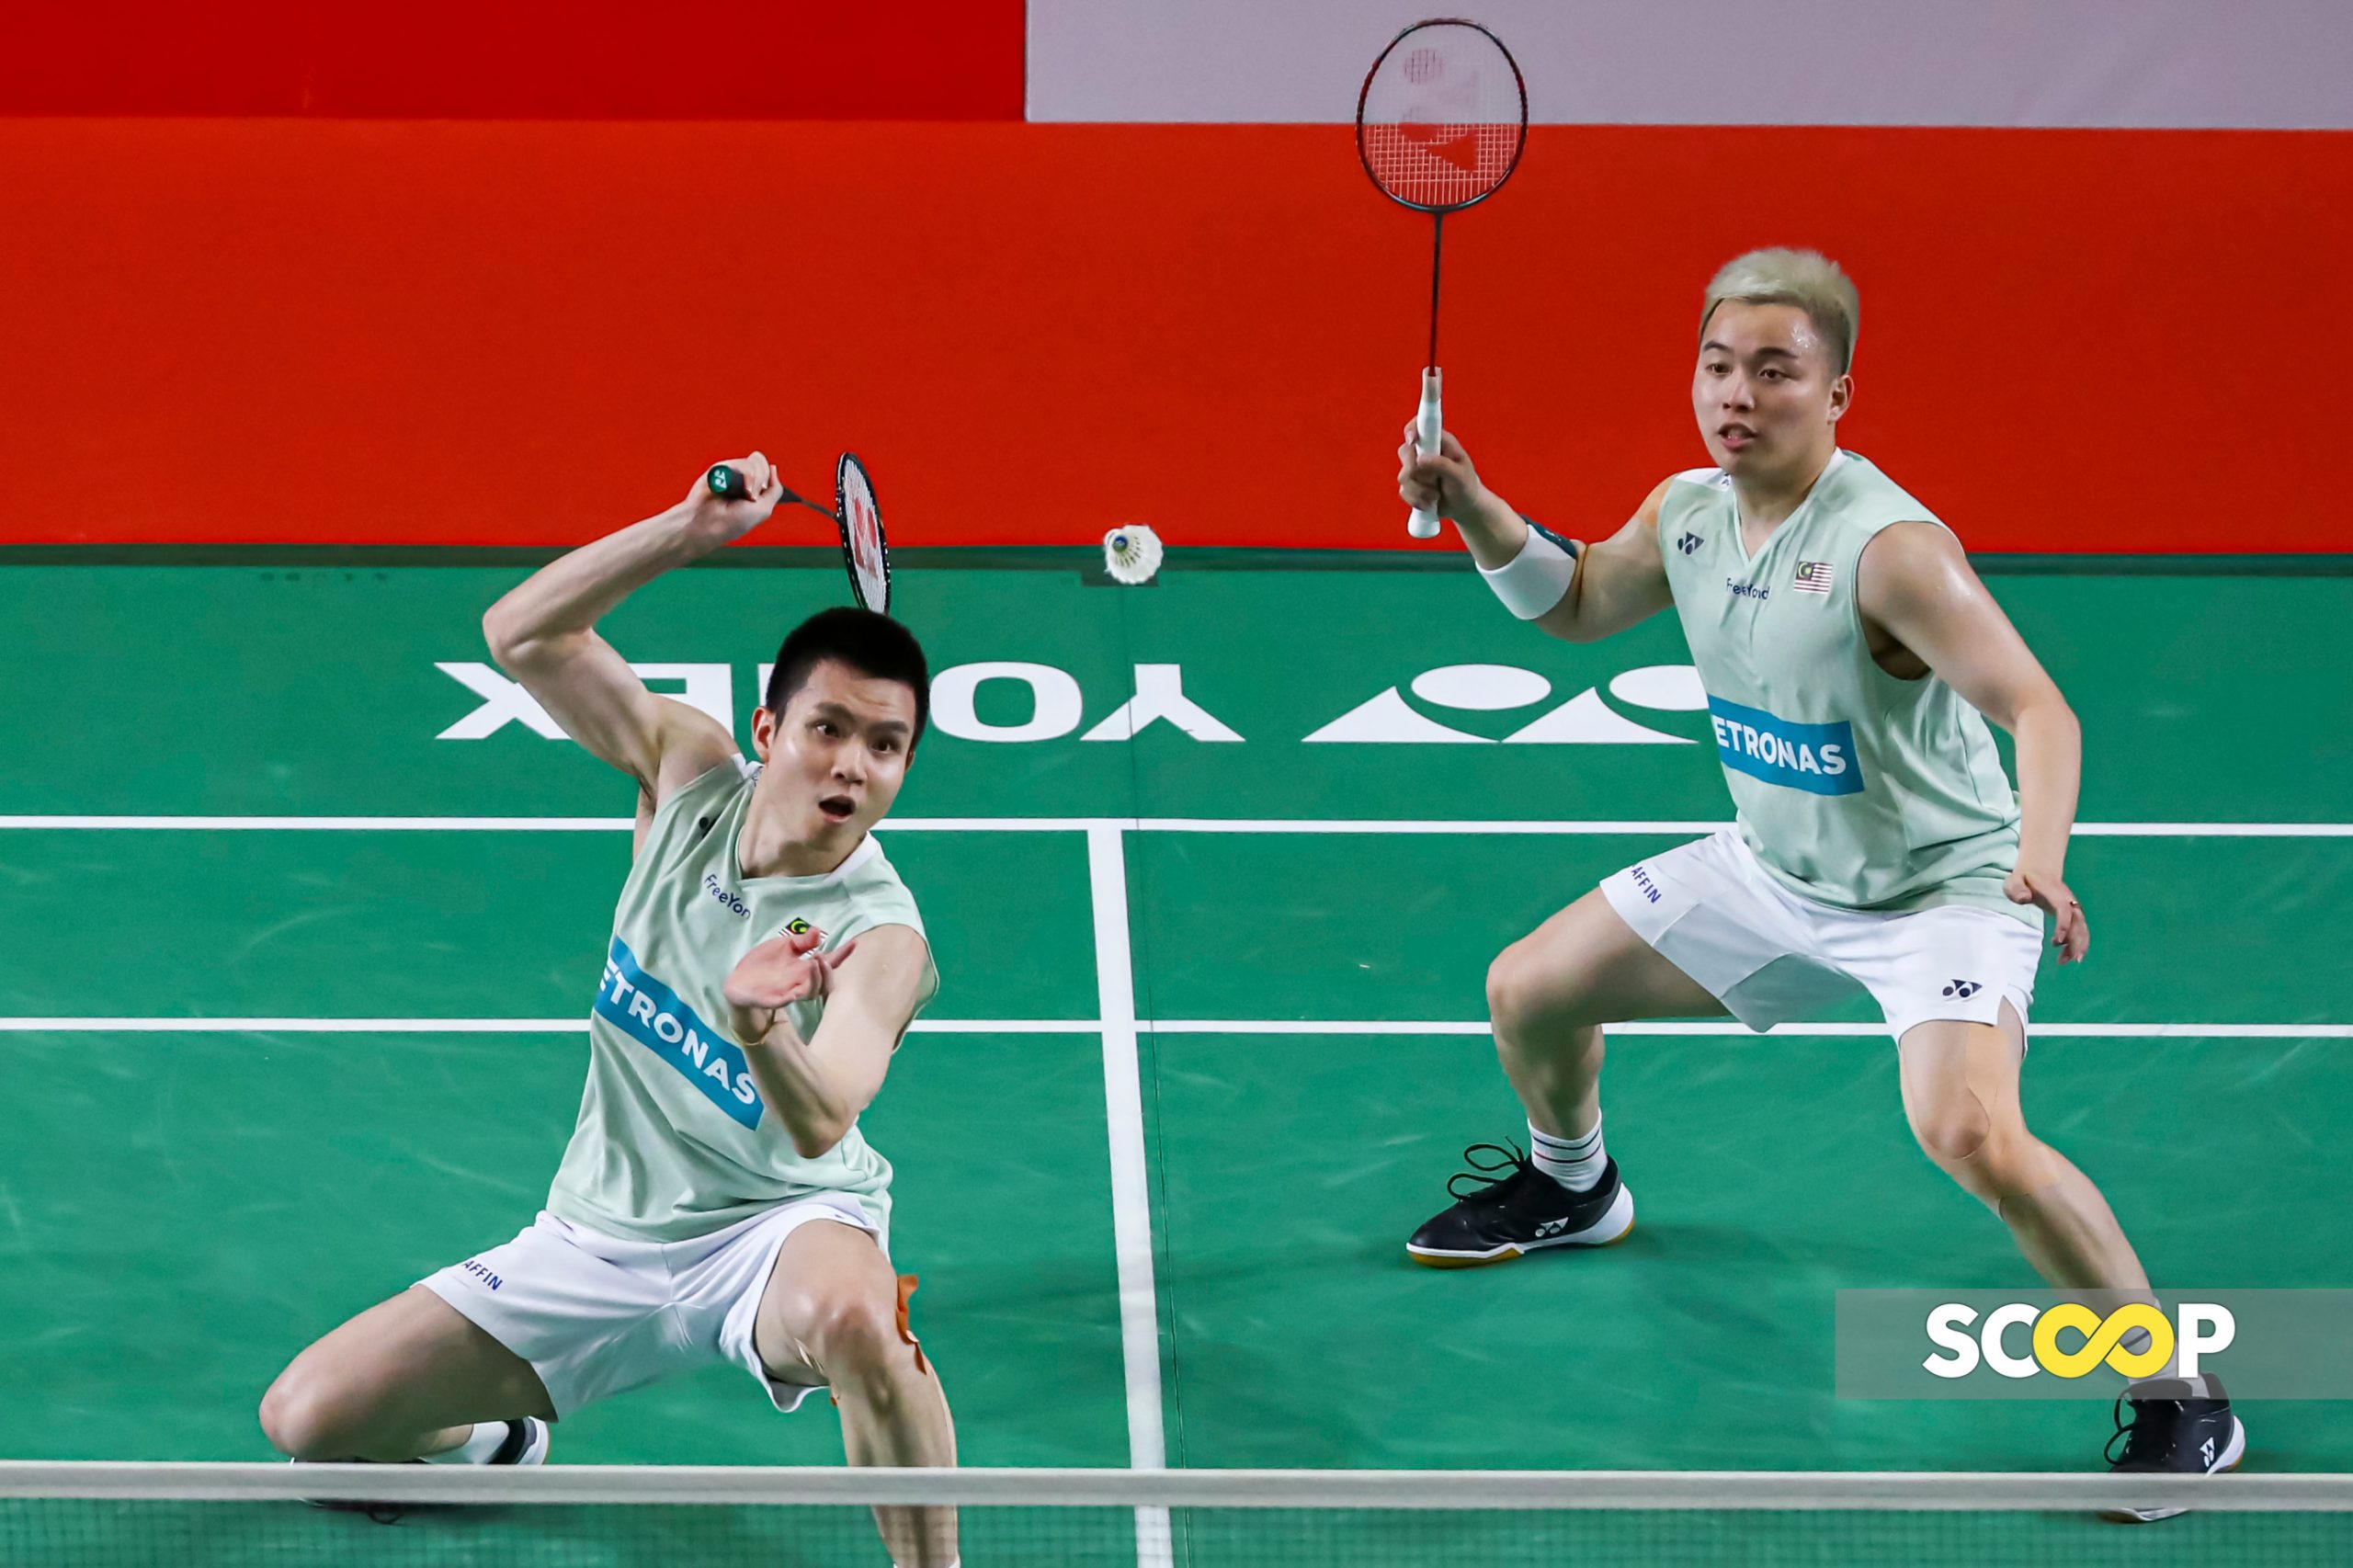 Game over for Aaron-Wooi Yik's BWF World Tour Finals